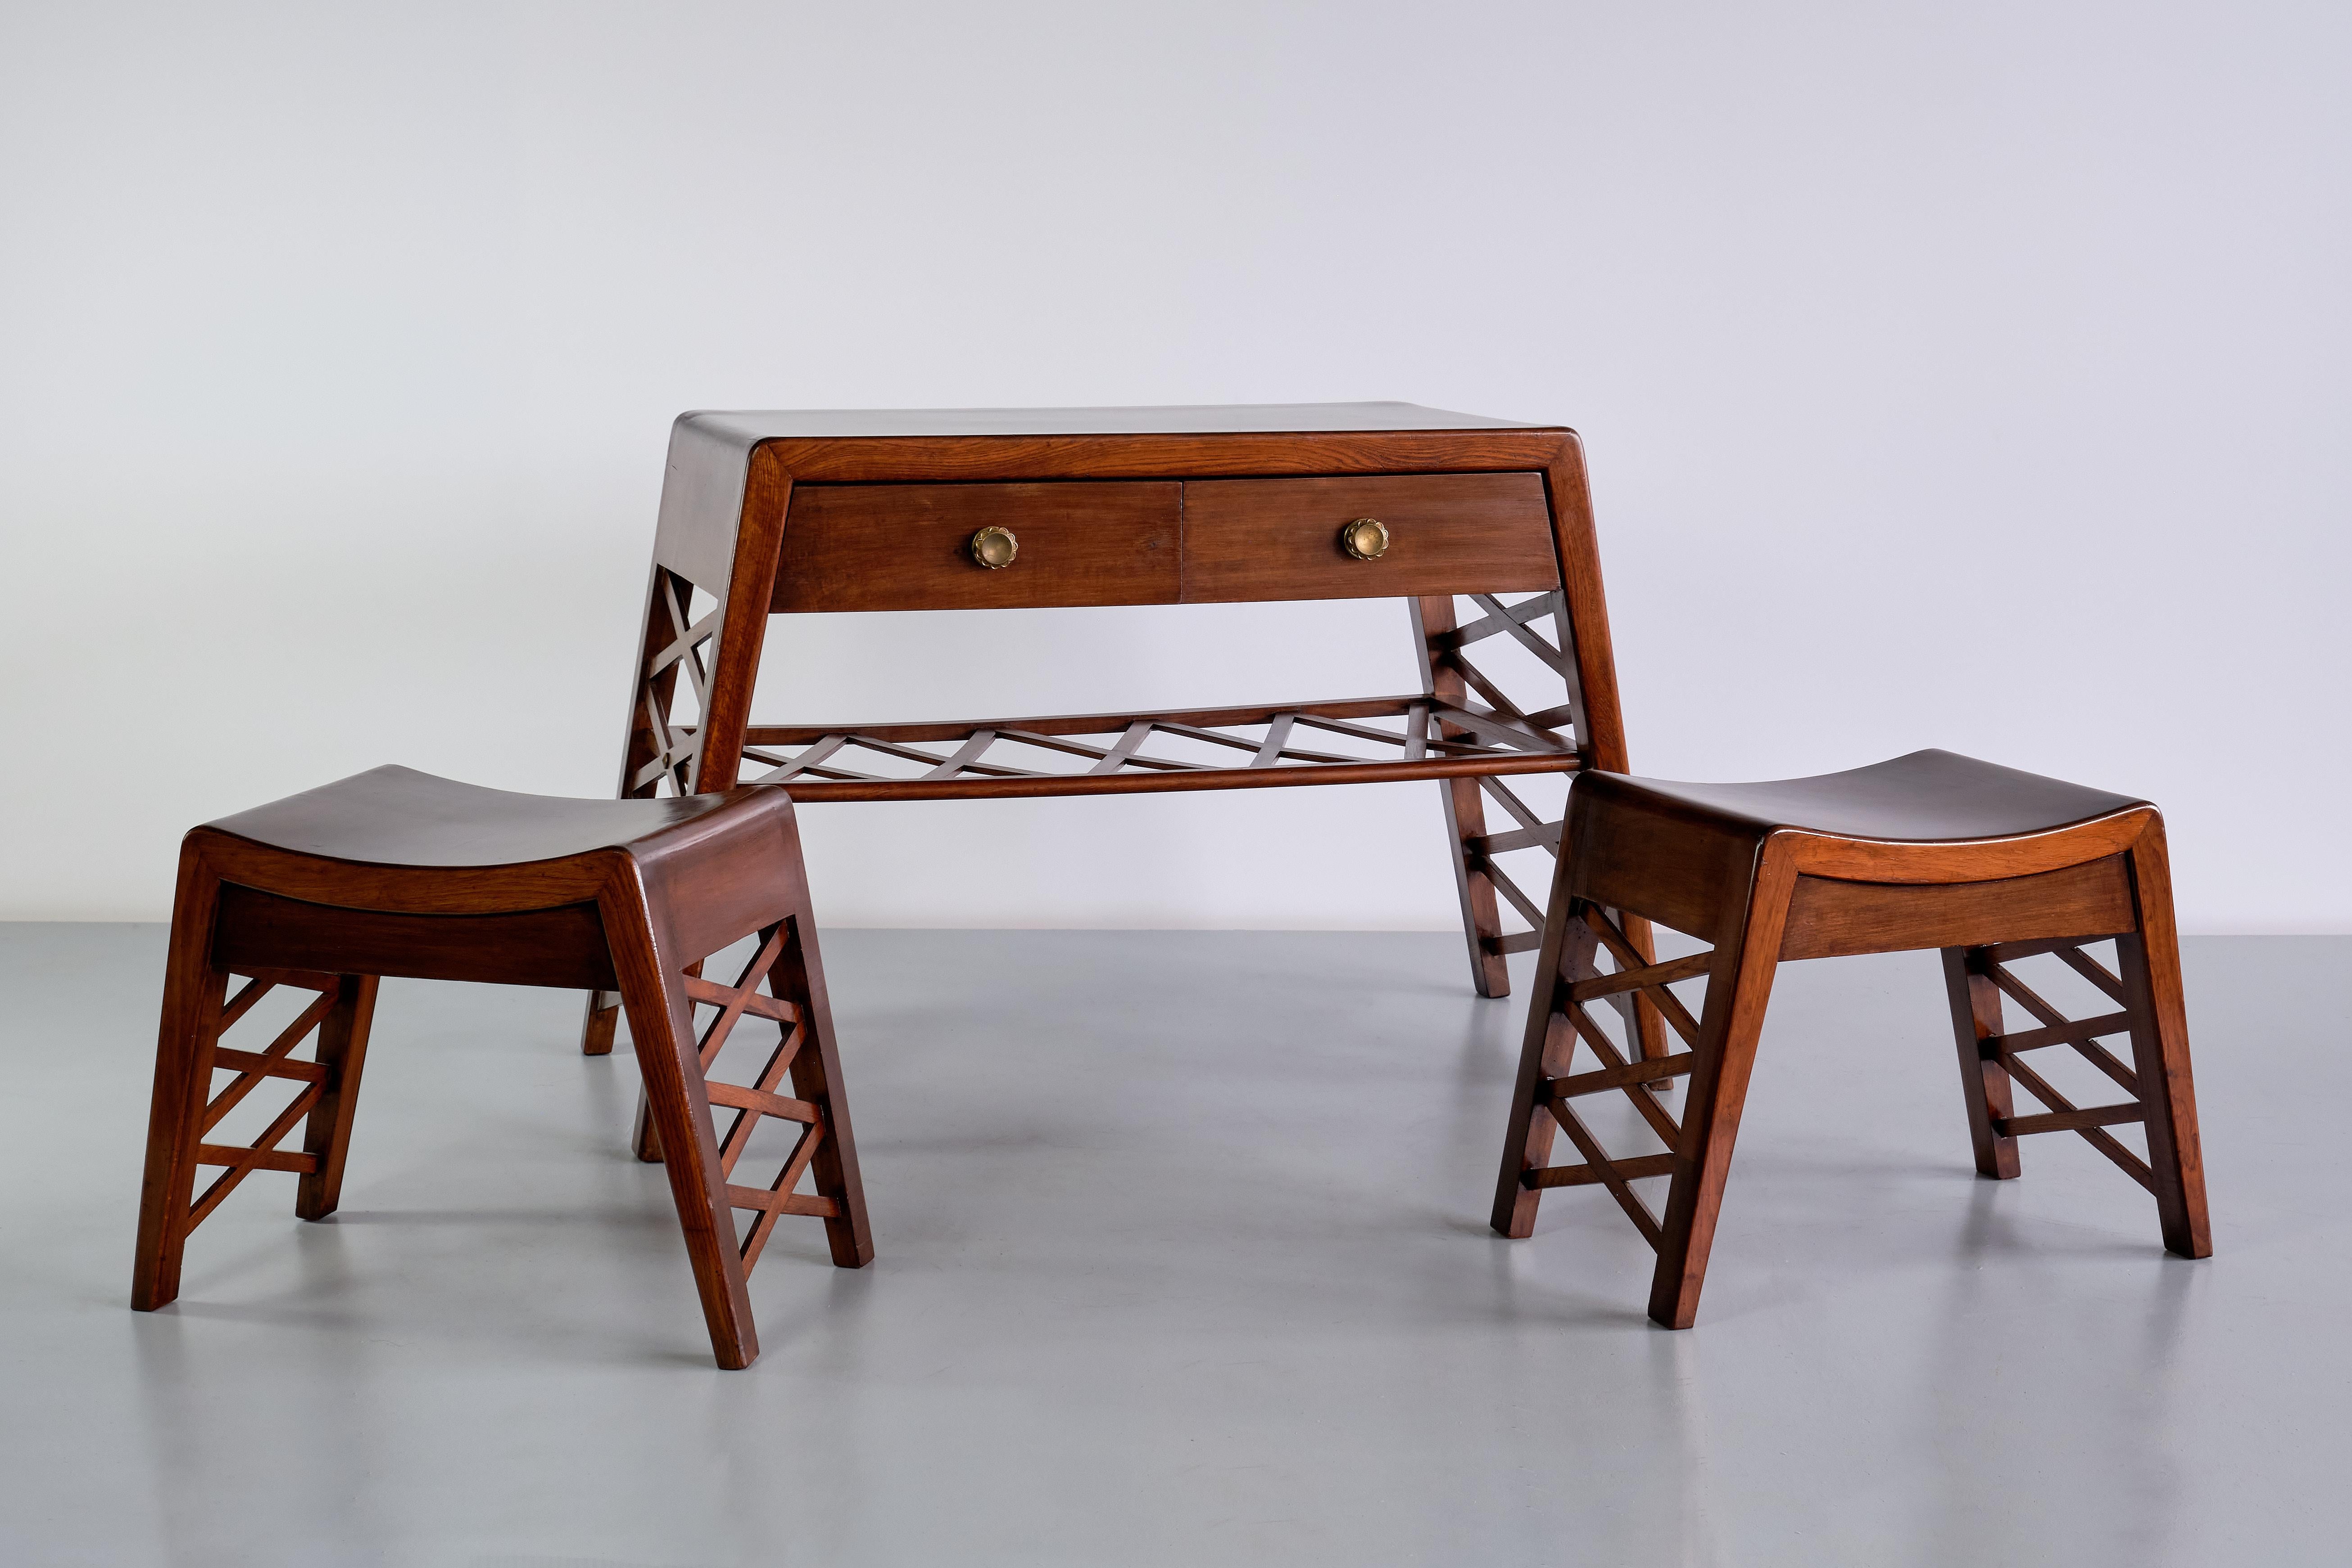 Art Deco Piero Portaluppi Attributed Pair of Stools in Chestnut Wood, Italy, Late 1930s For Sale